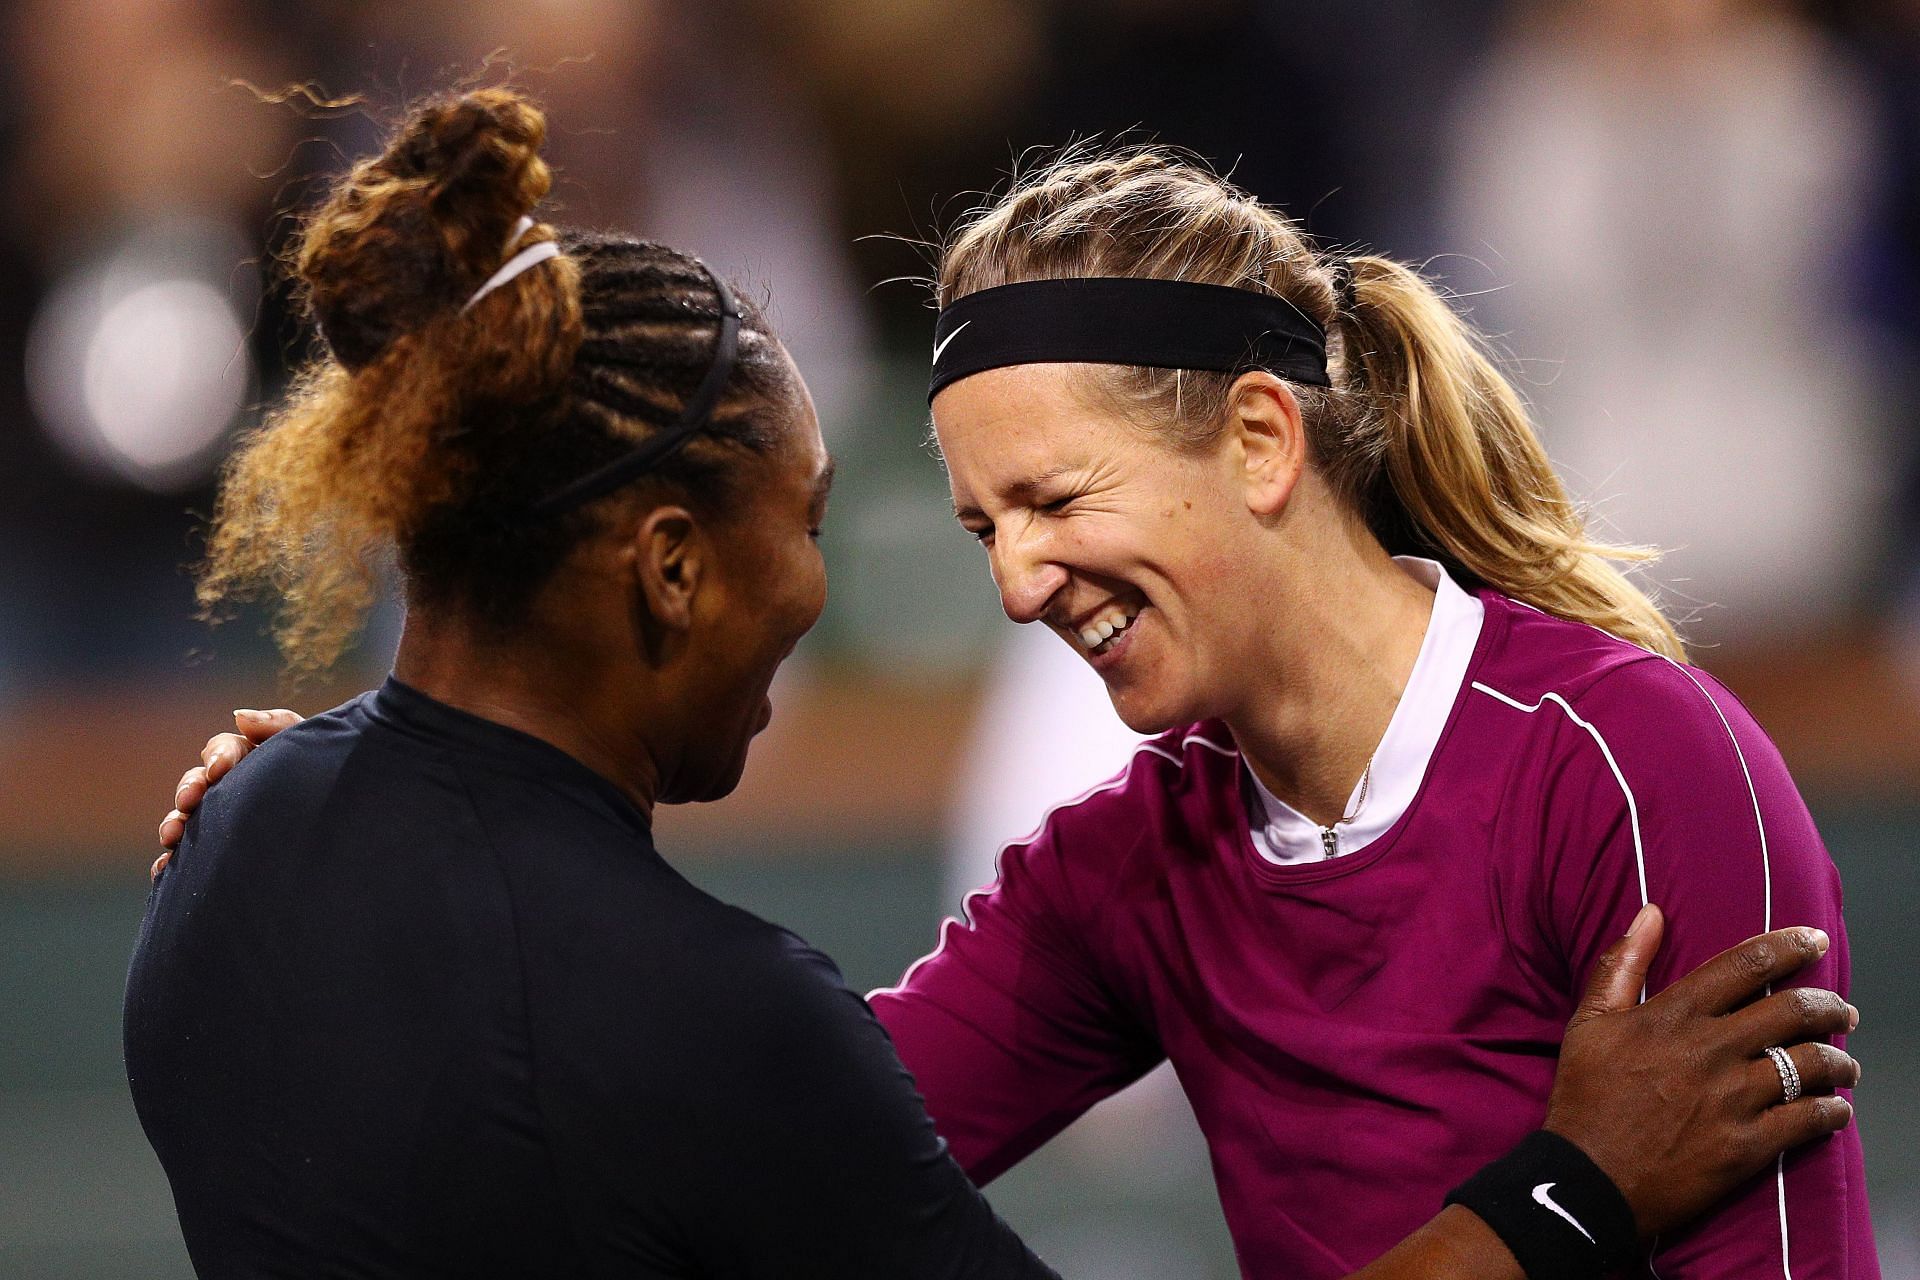 Victoria Azarenka and Serena Williams during the 2019 Indian Wells Open